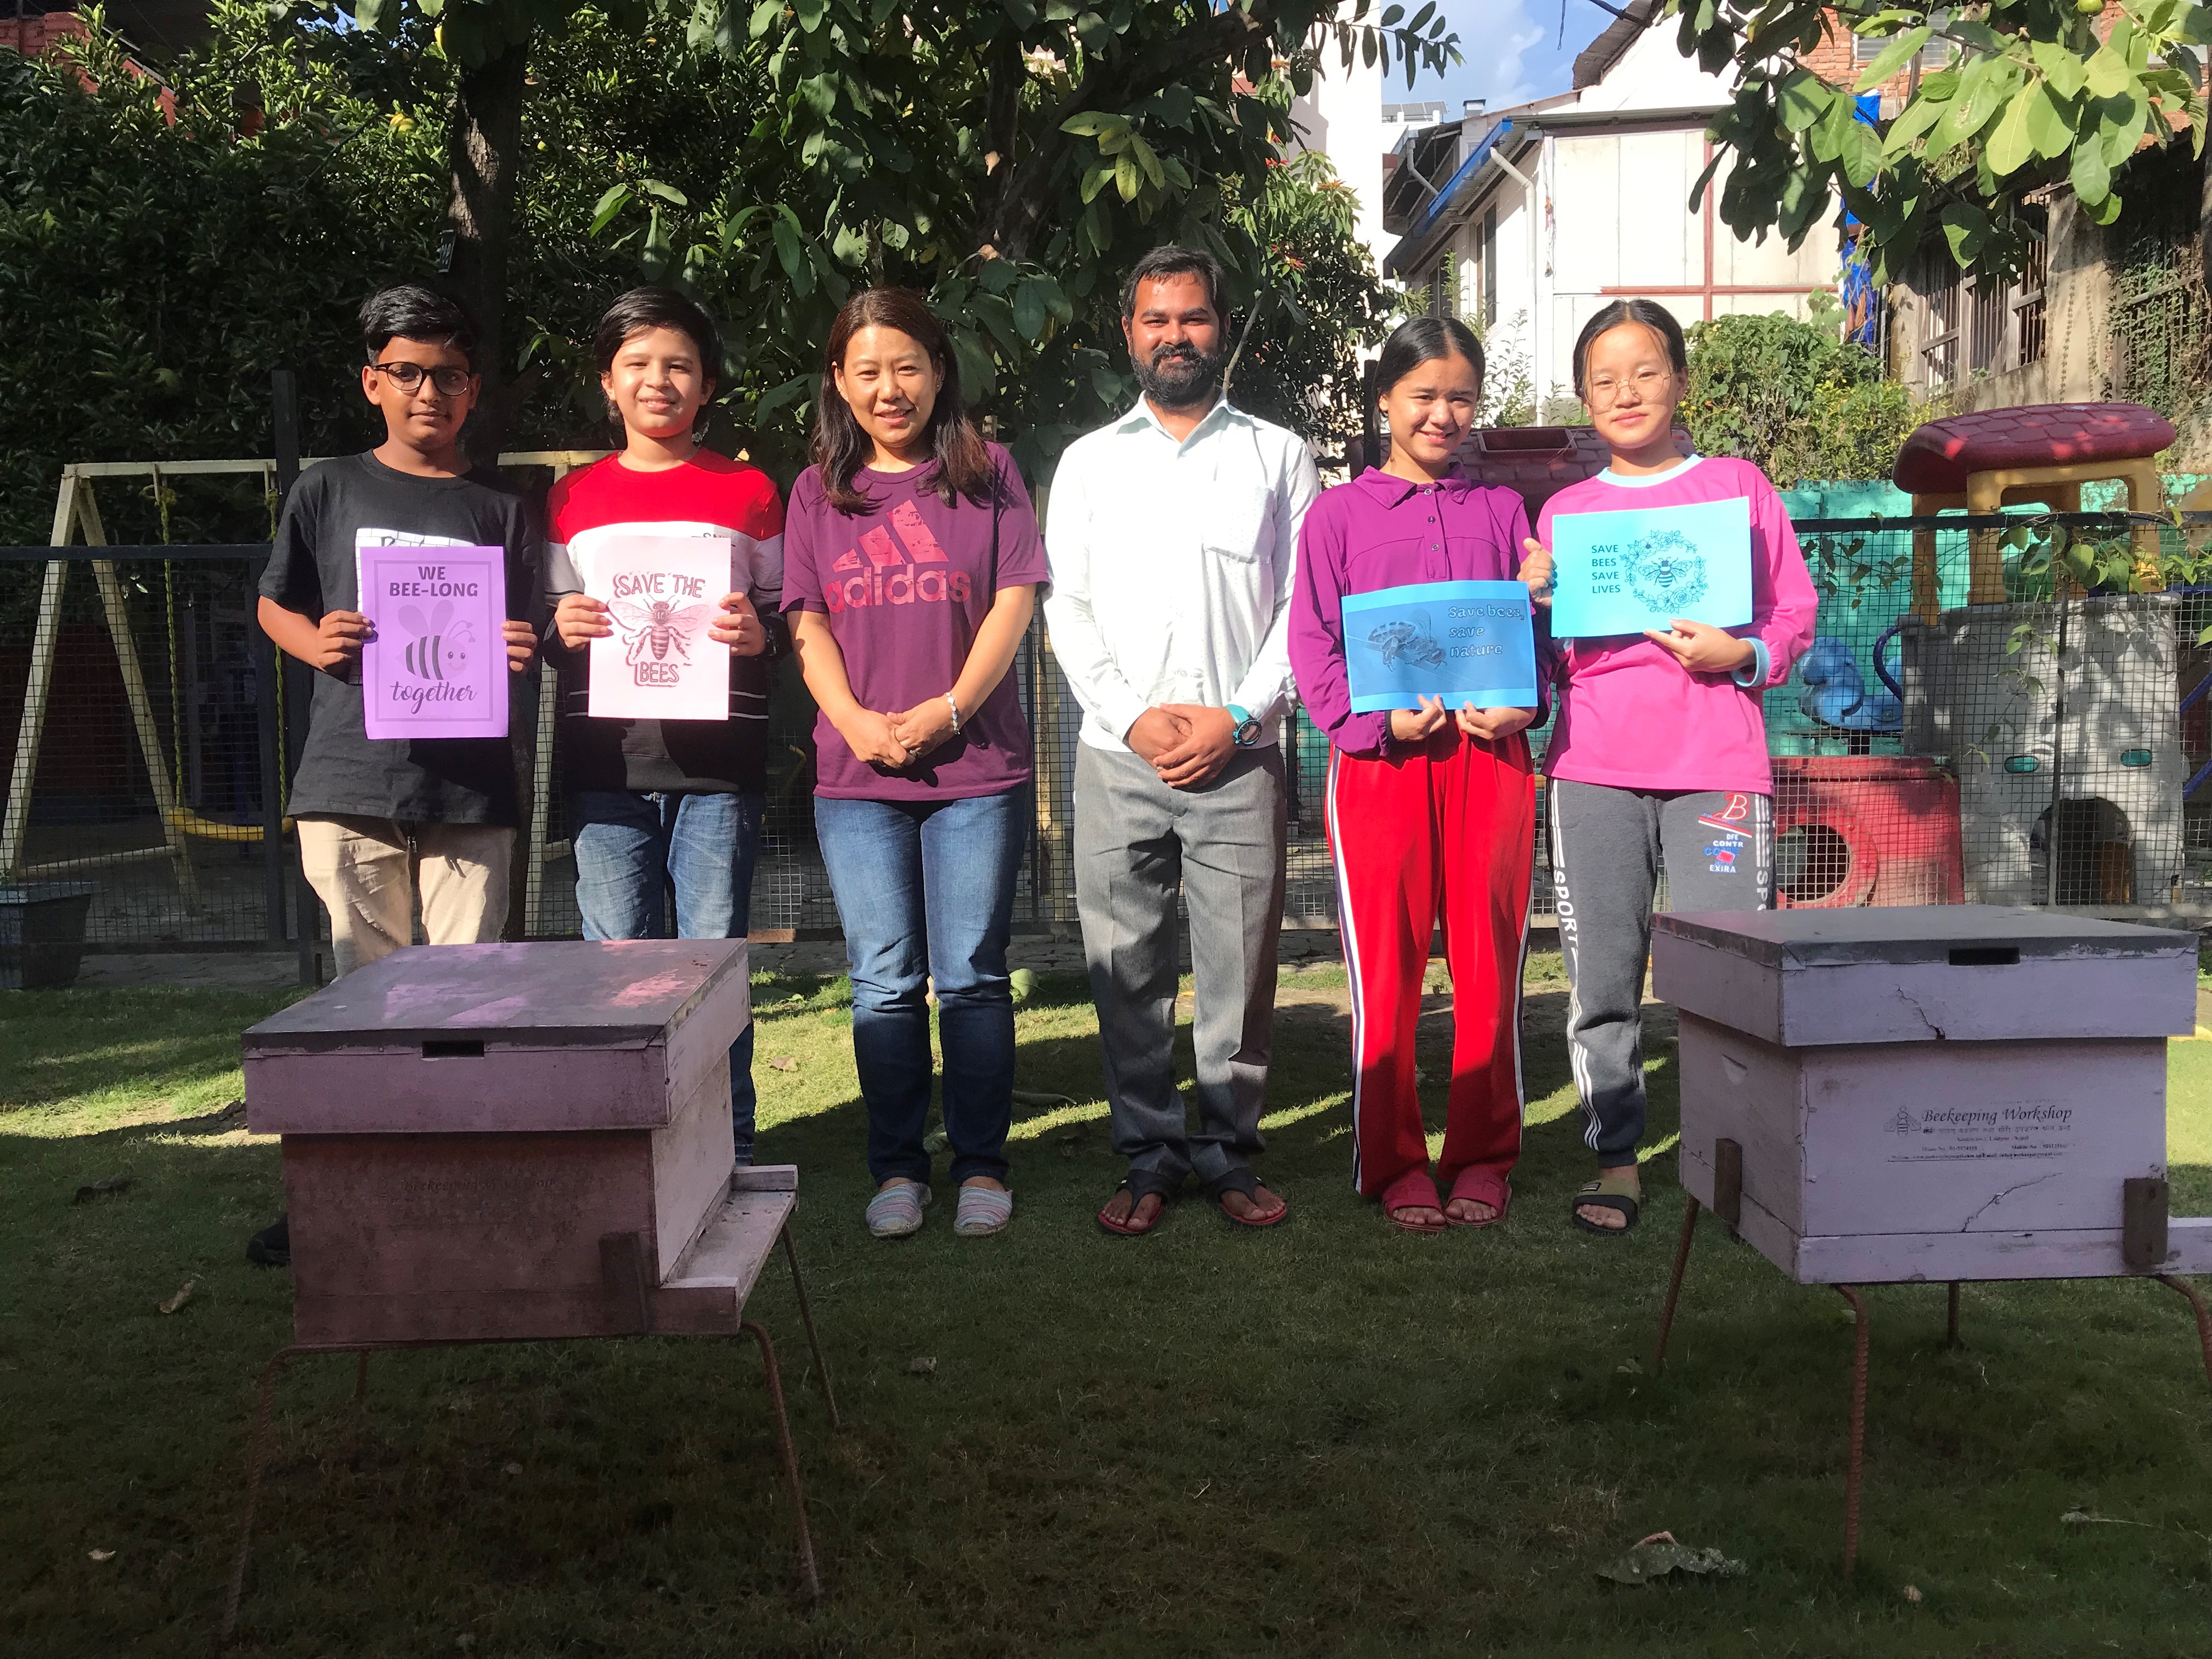 using bees to teach about climate change